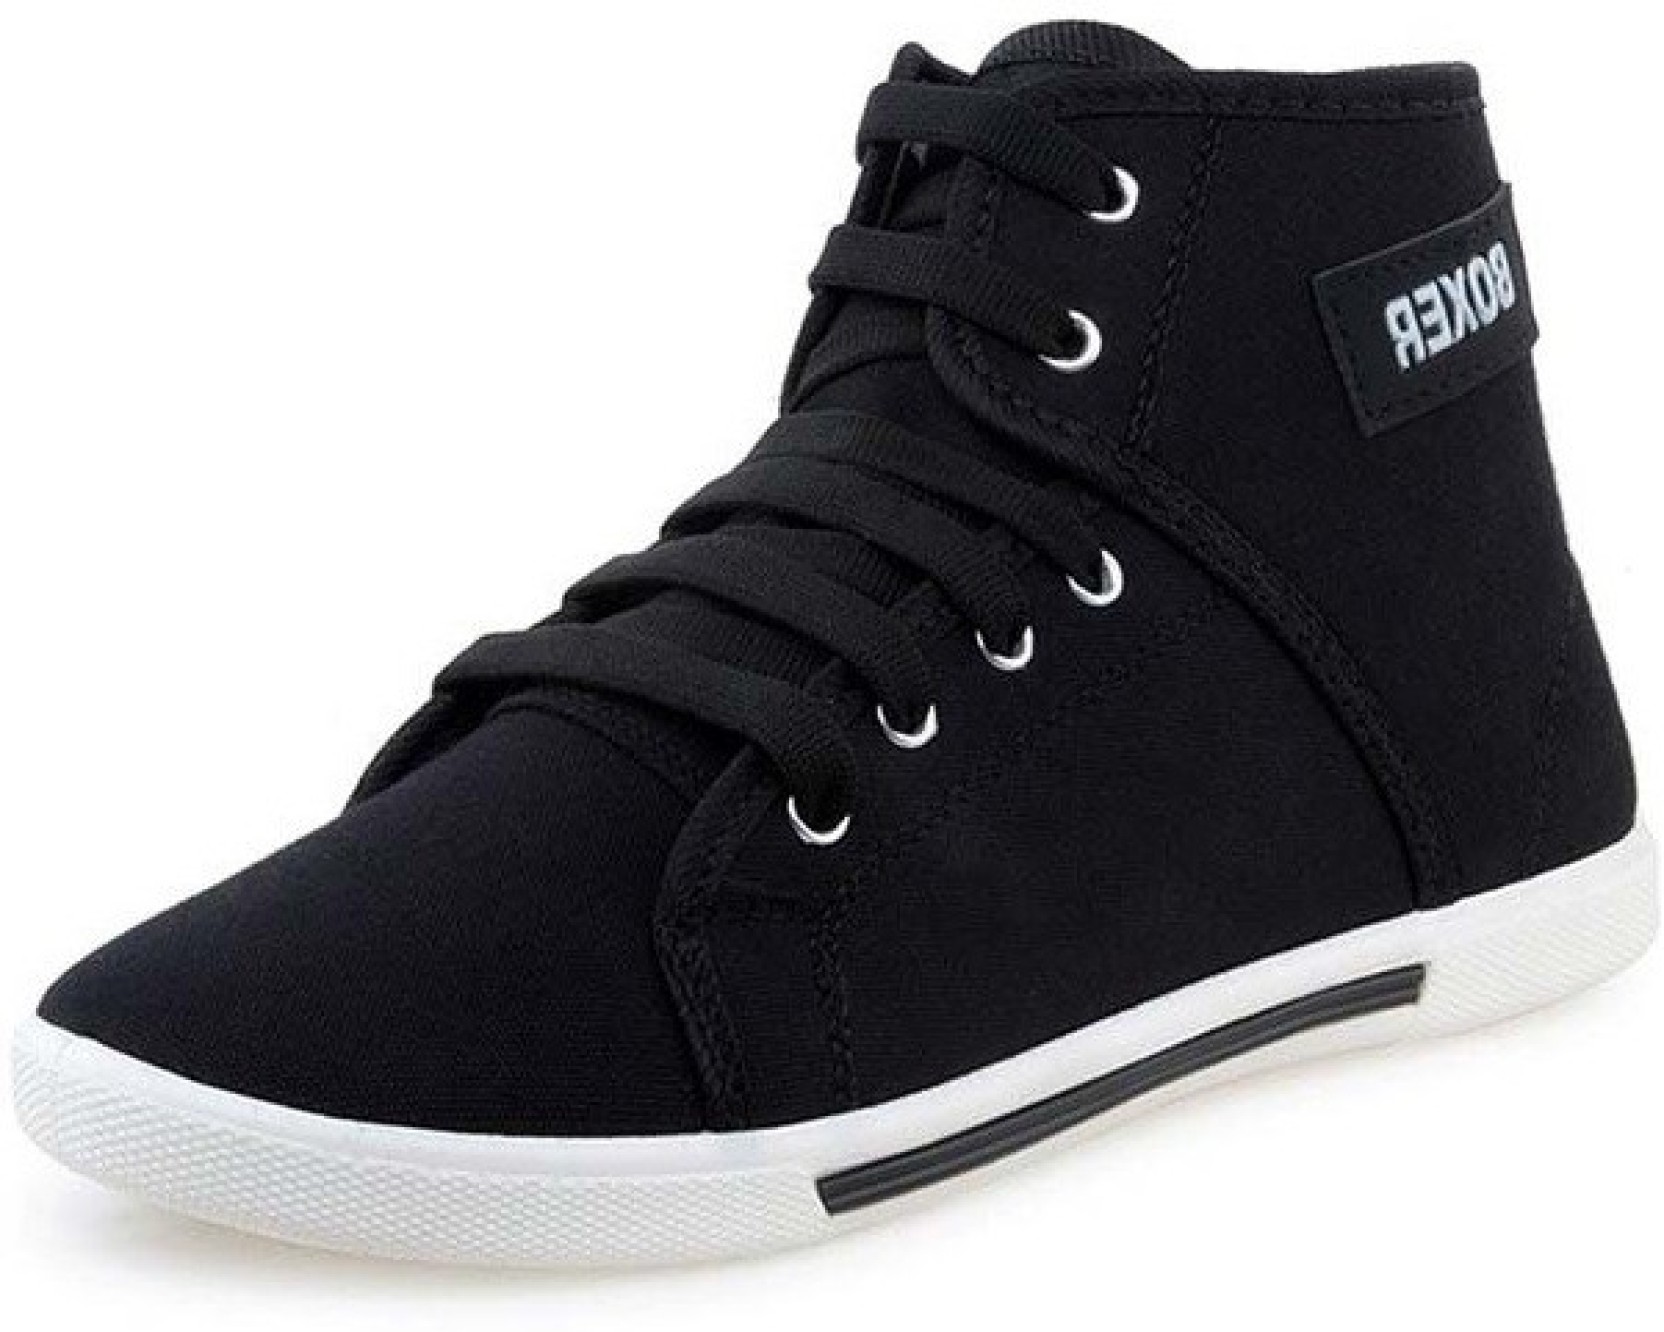 Gusto Canvas Shoes Buy Black Color Gusto Canvas Shoes